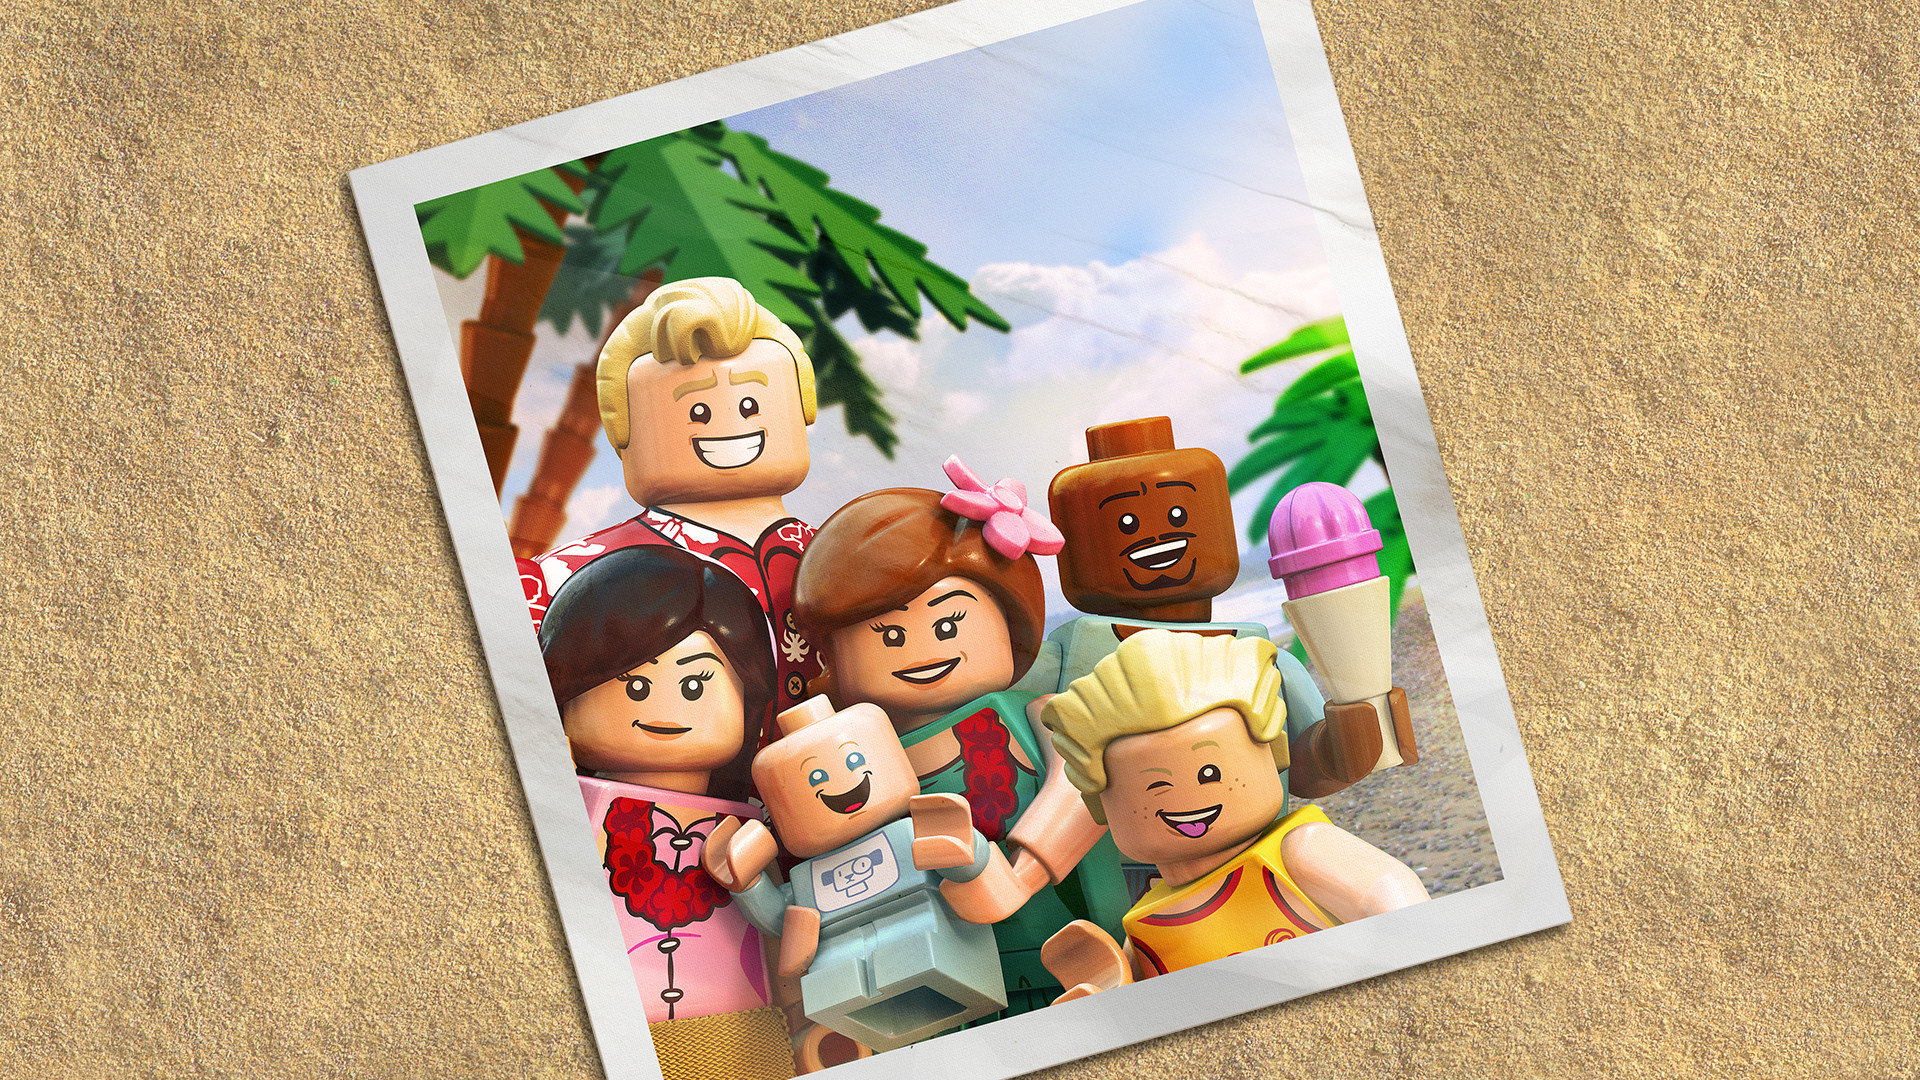 LEGO THE INCREDIBLES - Parr Family Vacation Character Pack DLC EU PS4 CD Key, 1.12 usd